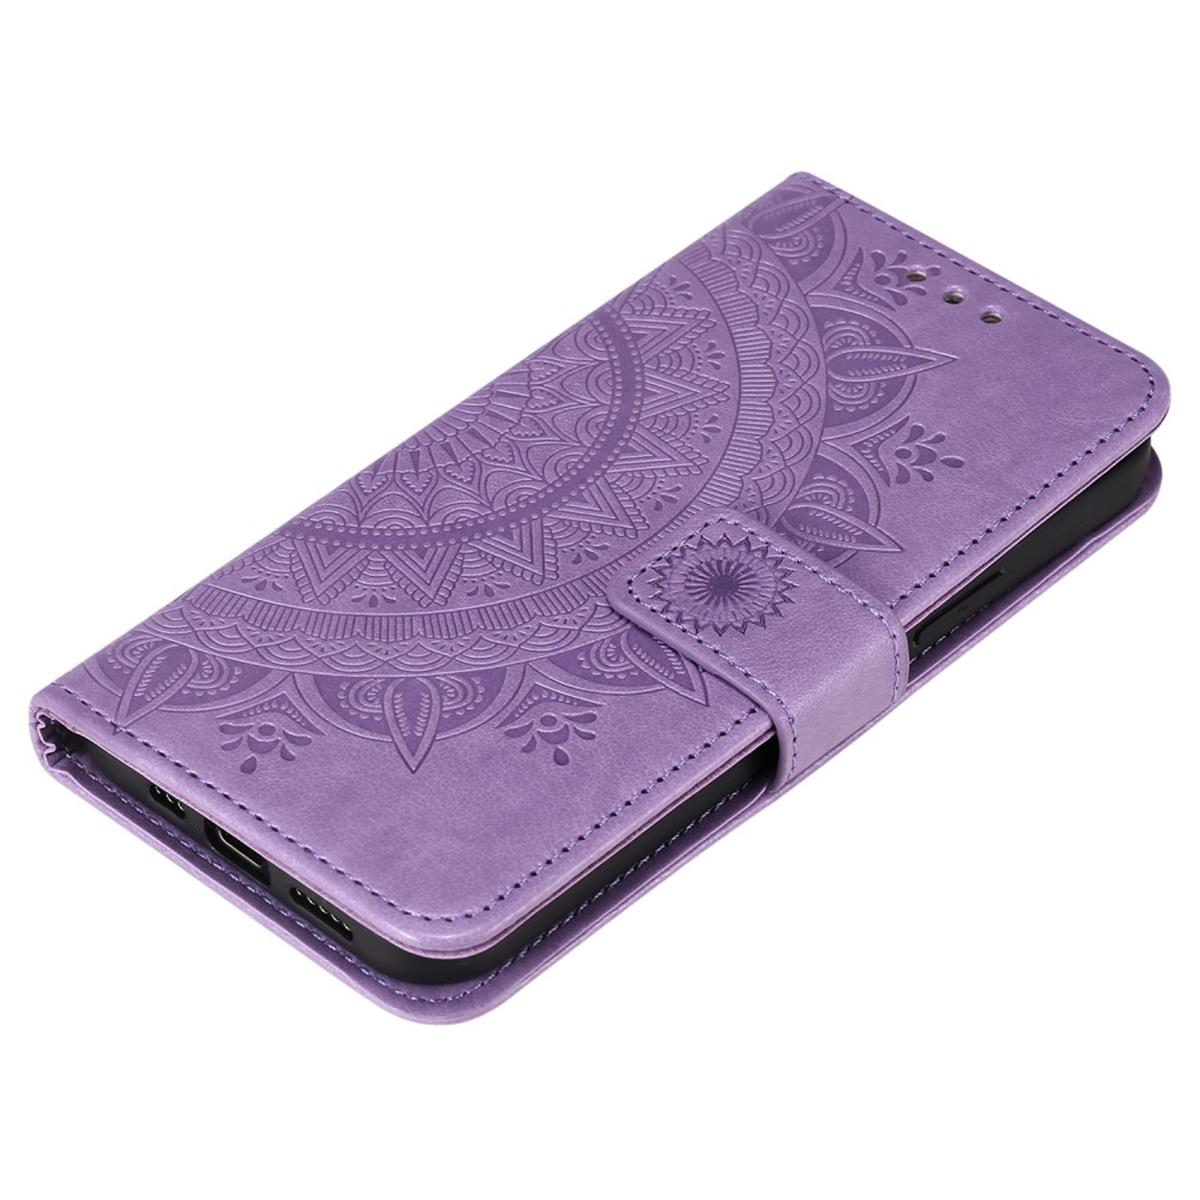 COVERKINGZ Klapphülle Max, 12 Mandala iPhone Pro Bookcover, Lila Muster, mit Apple